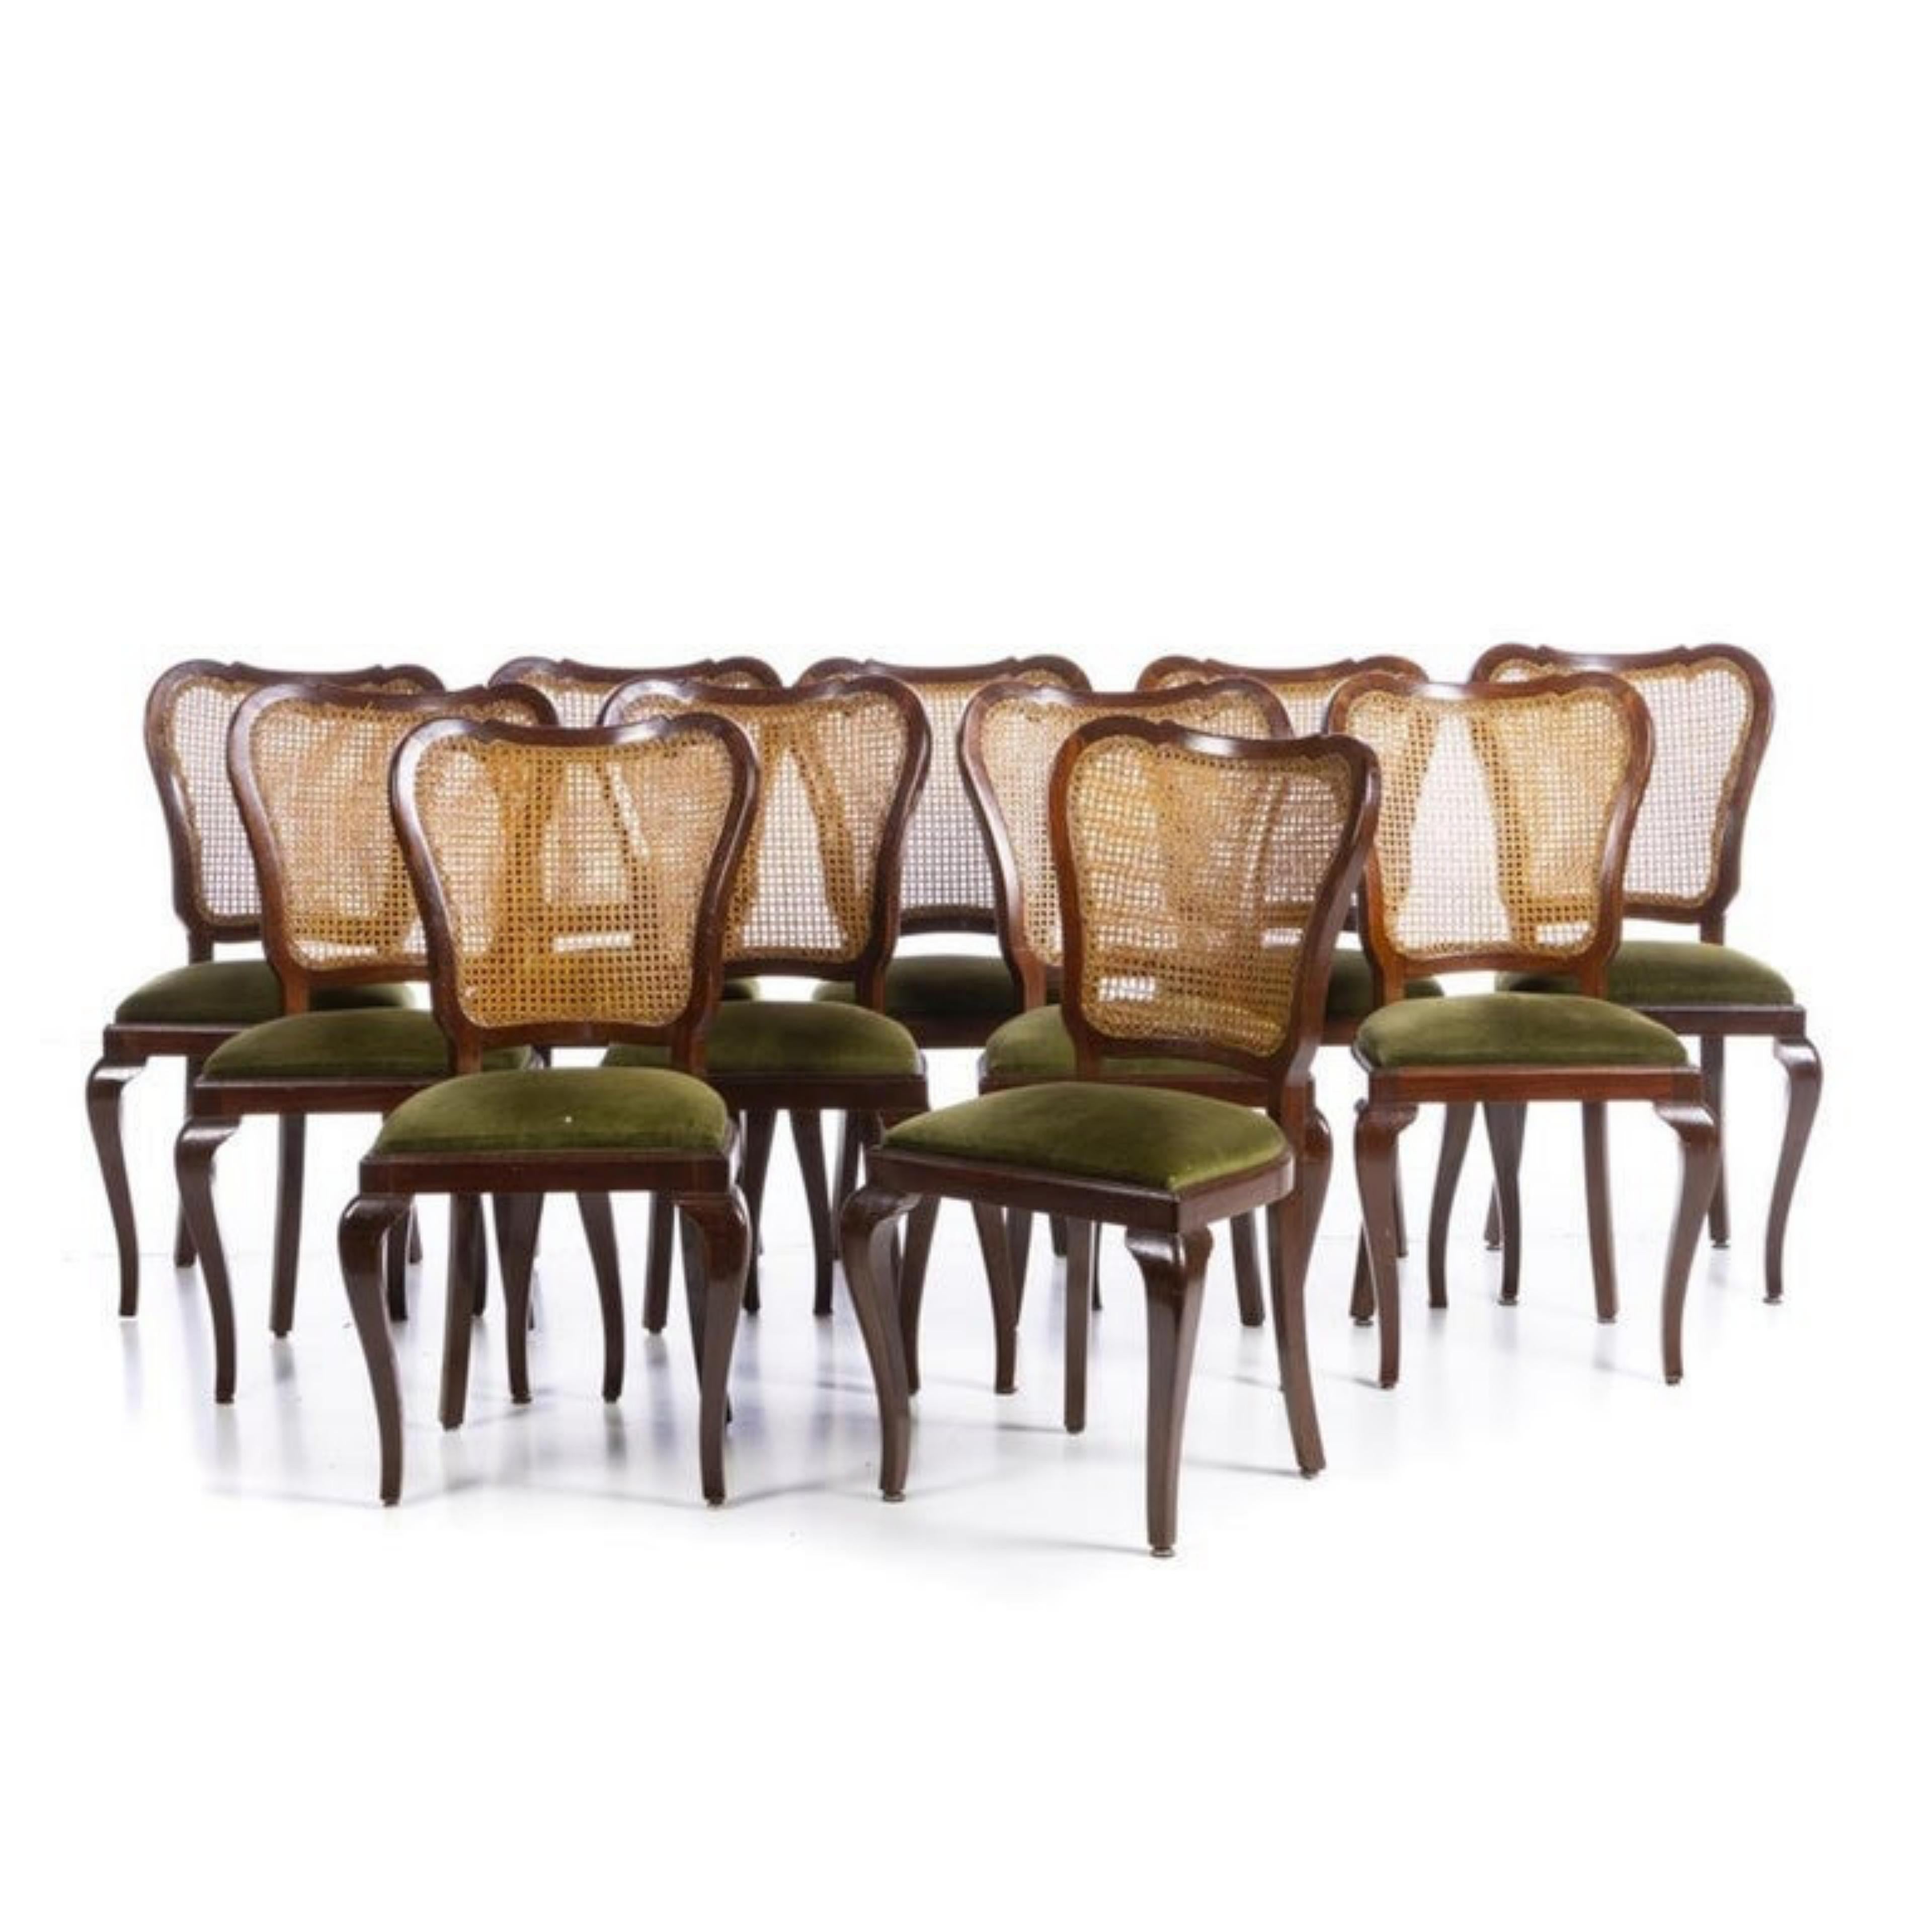 Hand-Crafted 11 Portuguese Chairs from the 20th Century in Mahogany For Sale